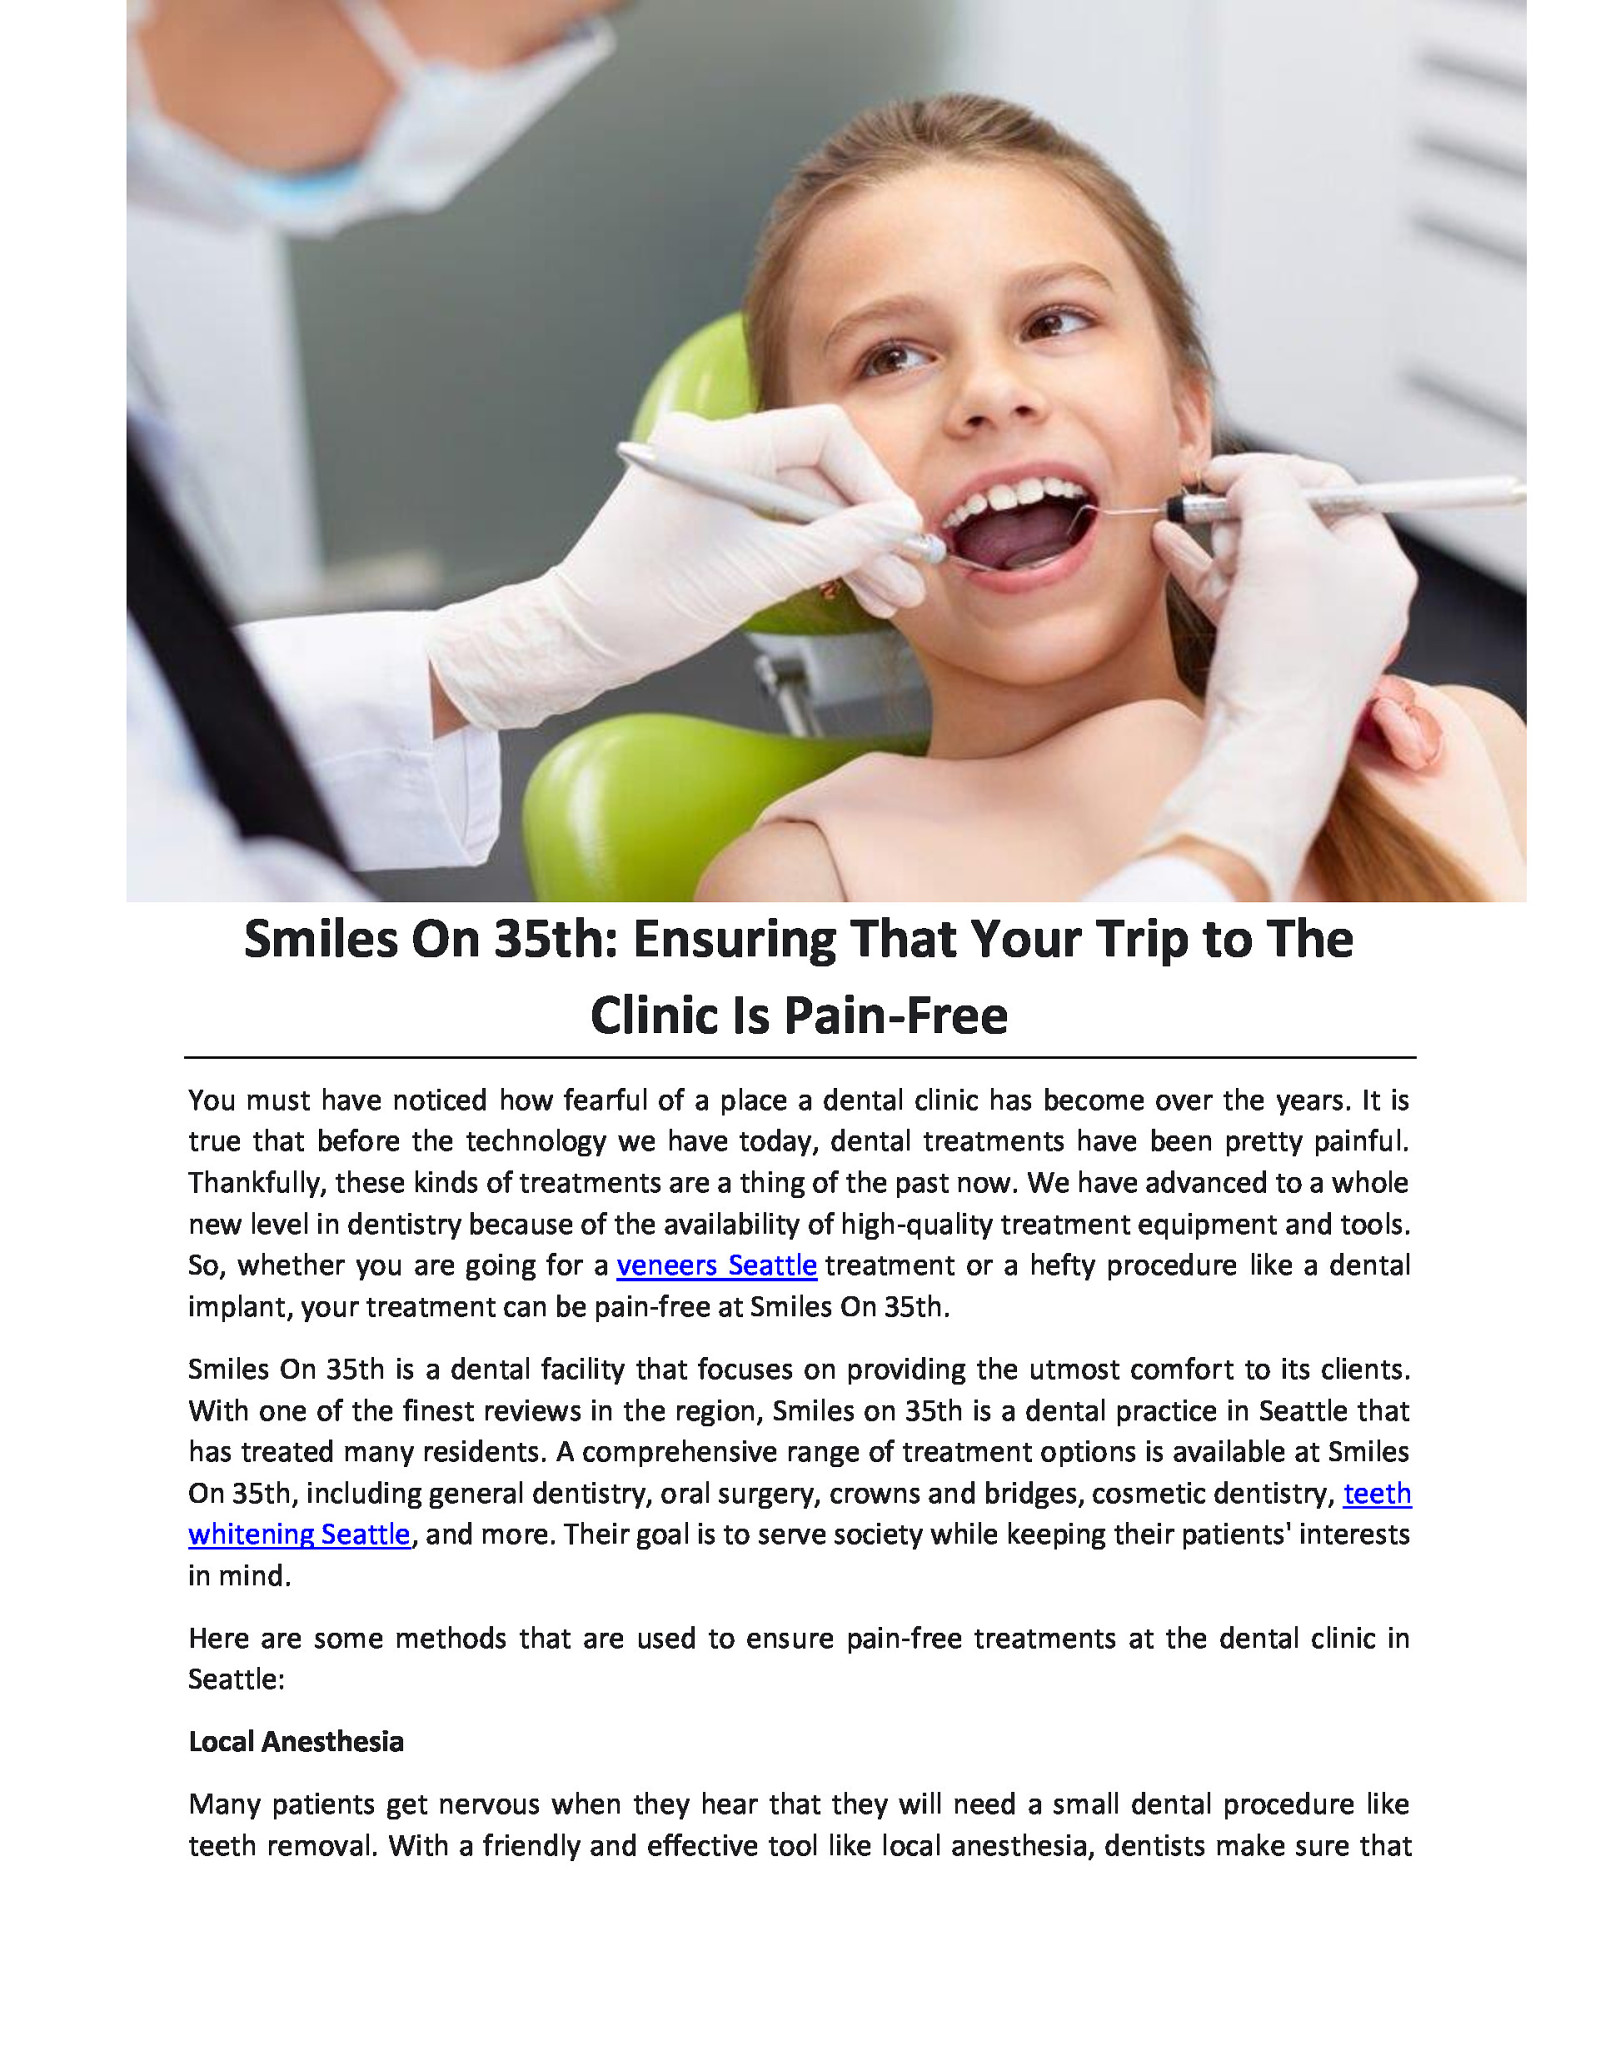 Smiles On 35th: Ensuring That Your Trip to The Clinic Is Pain-Free